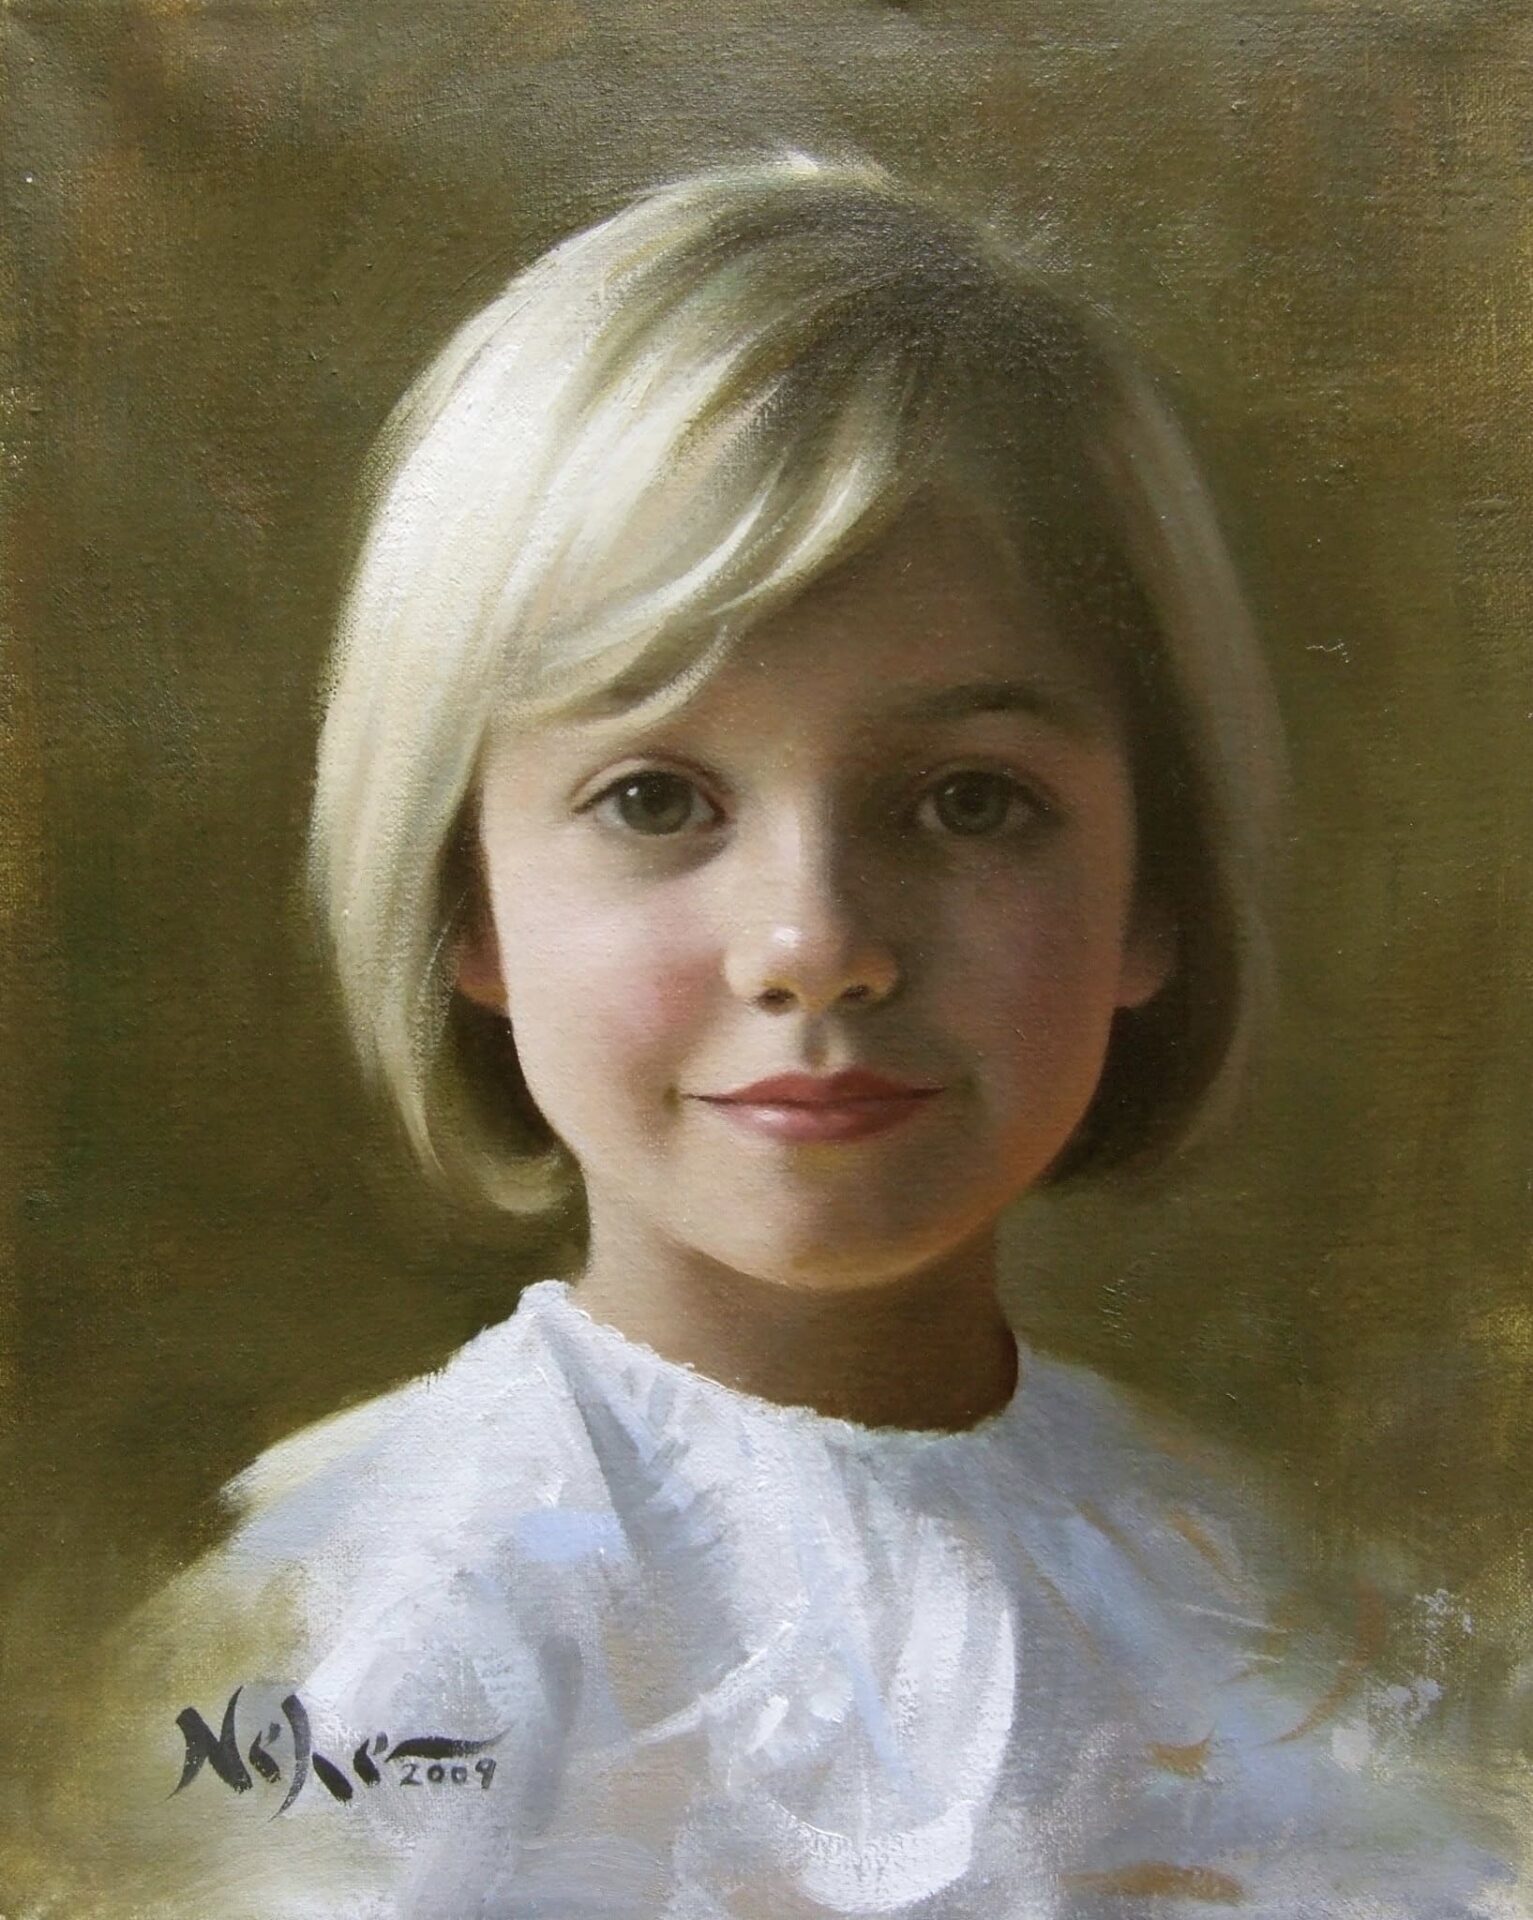 A portrait painting of a young girl